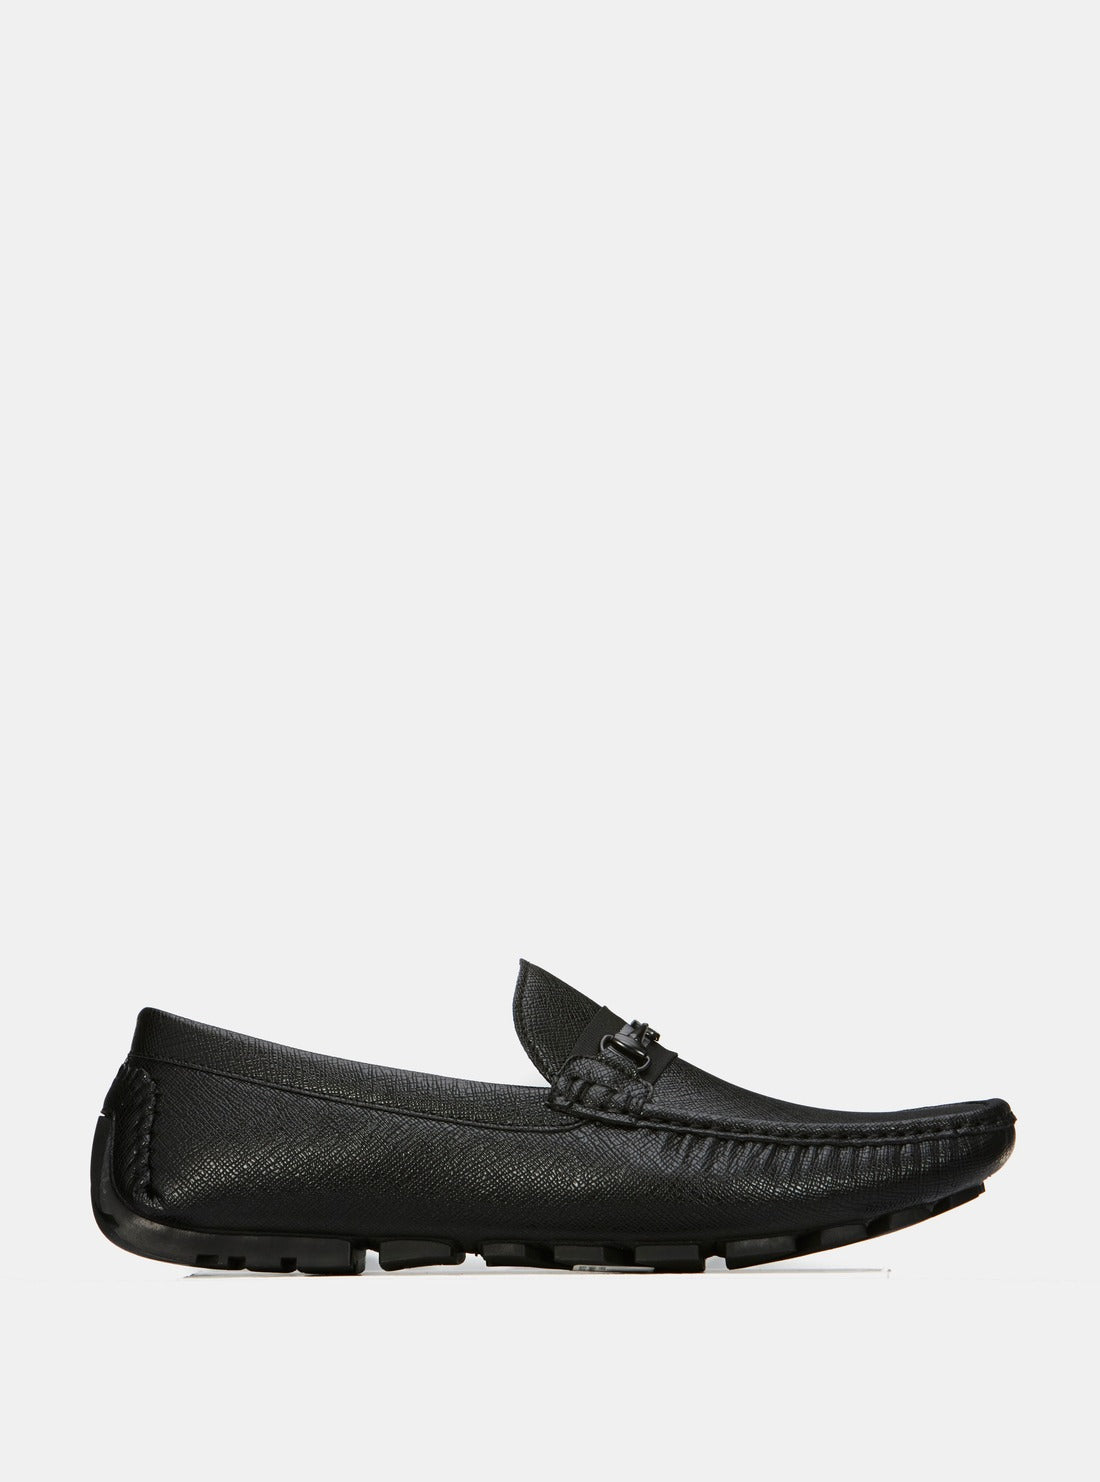 GUESS Black Aarav Loafers side view